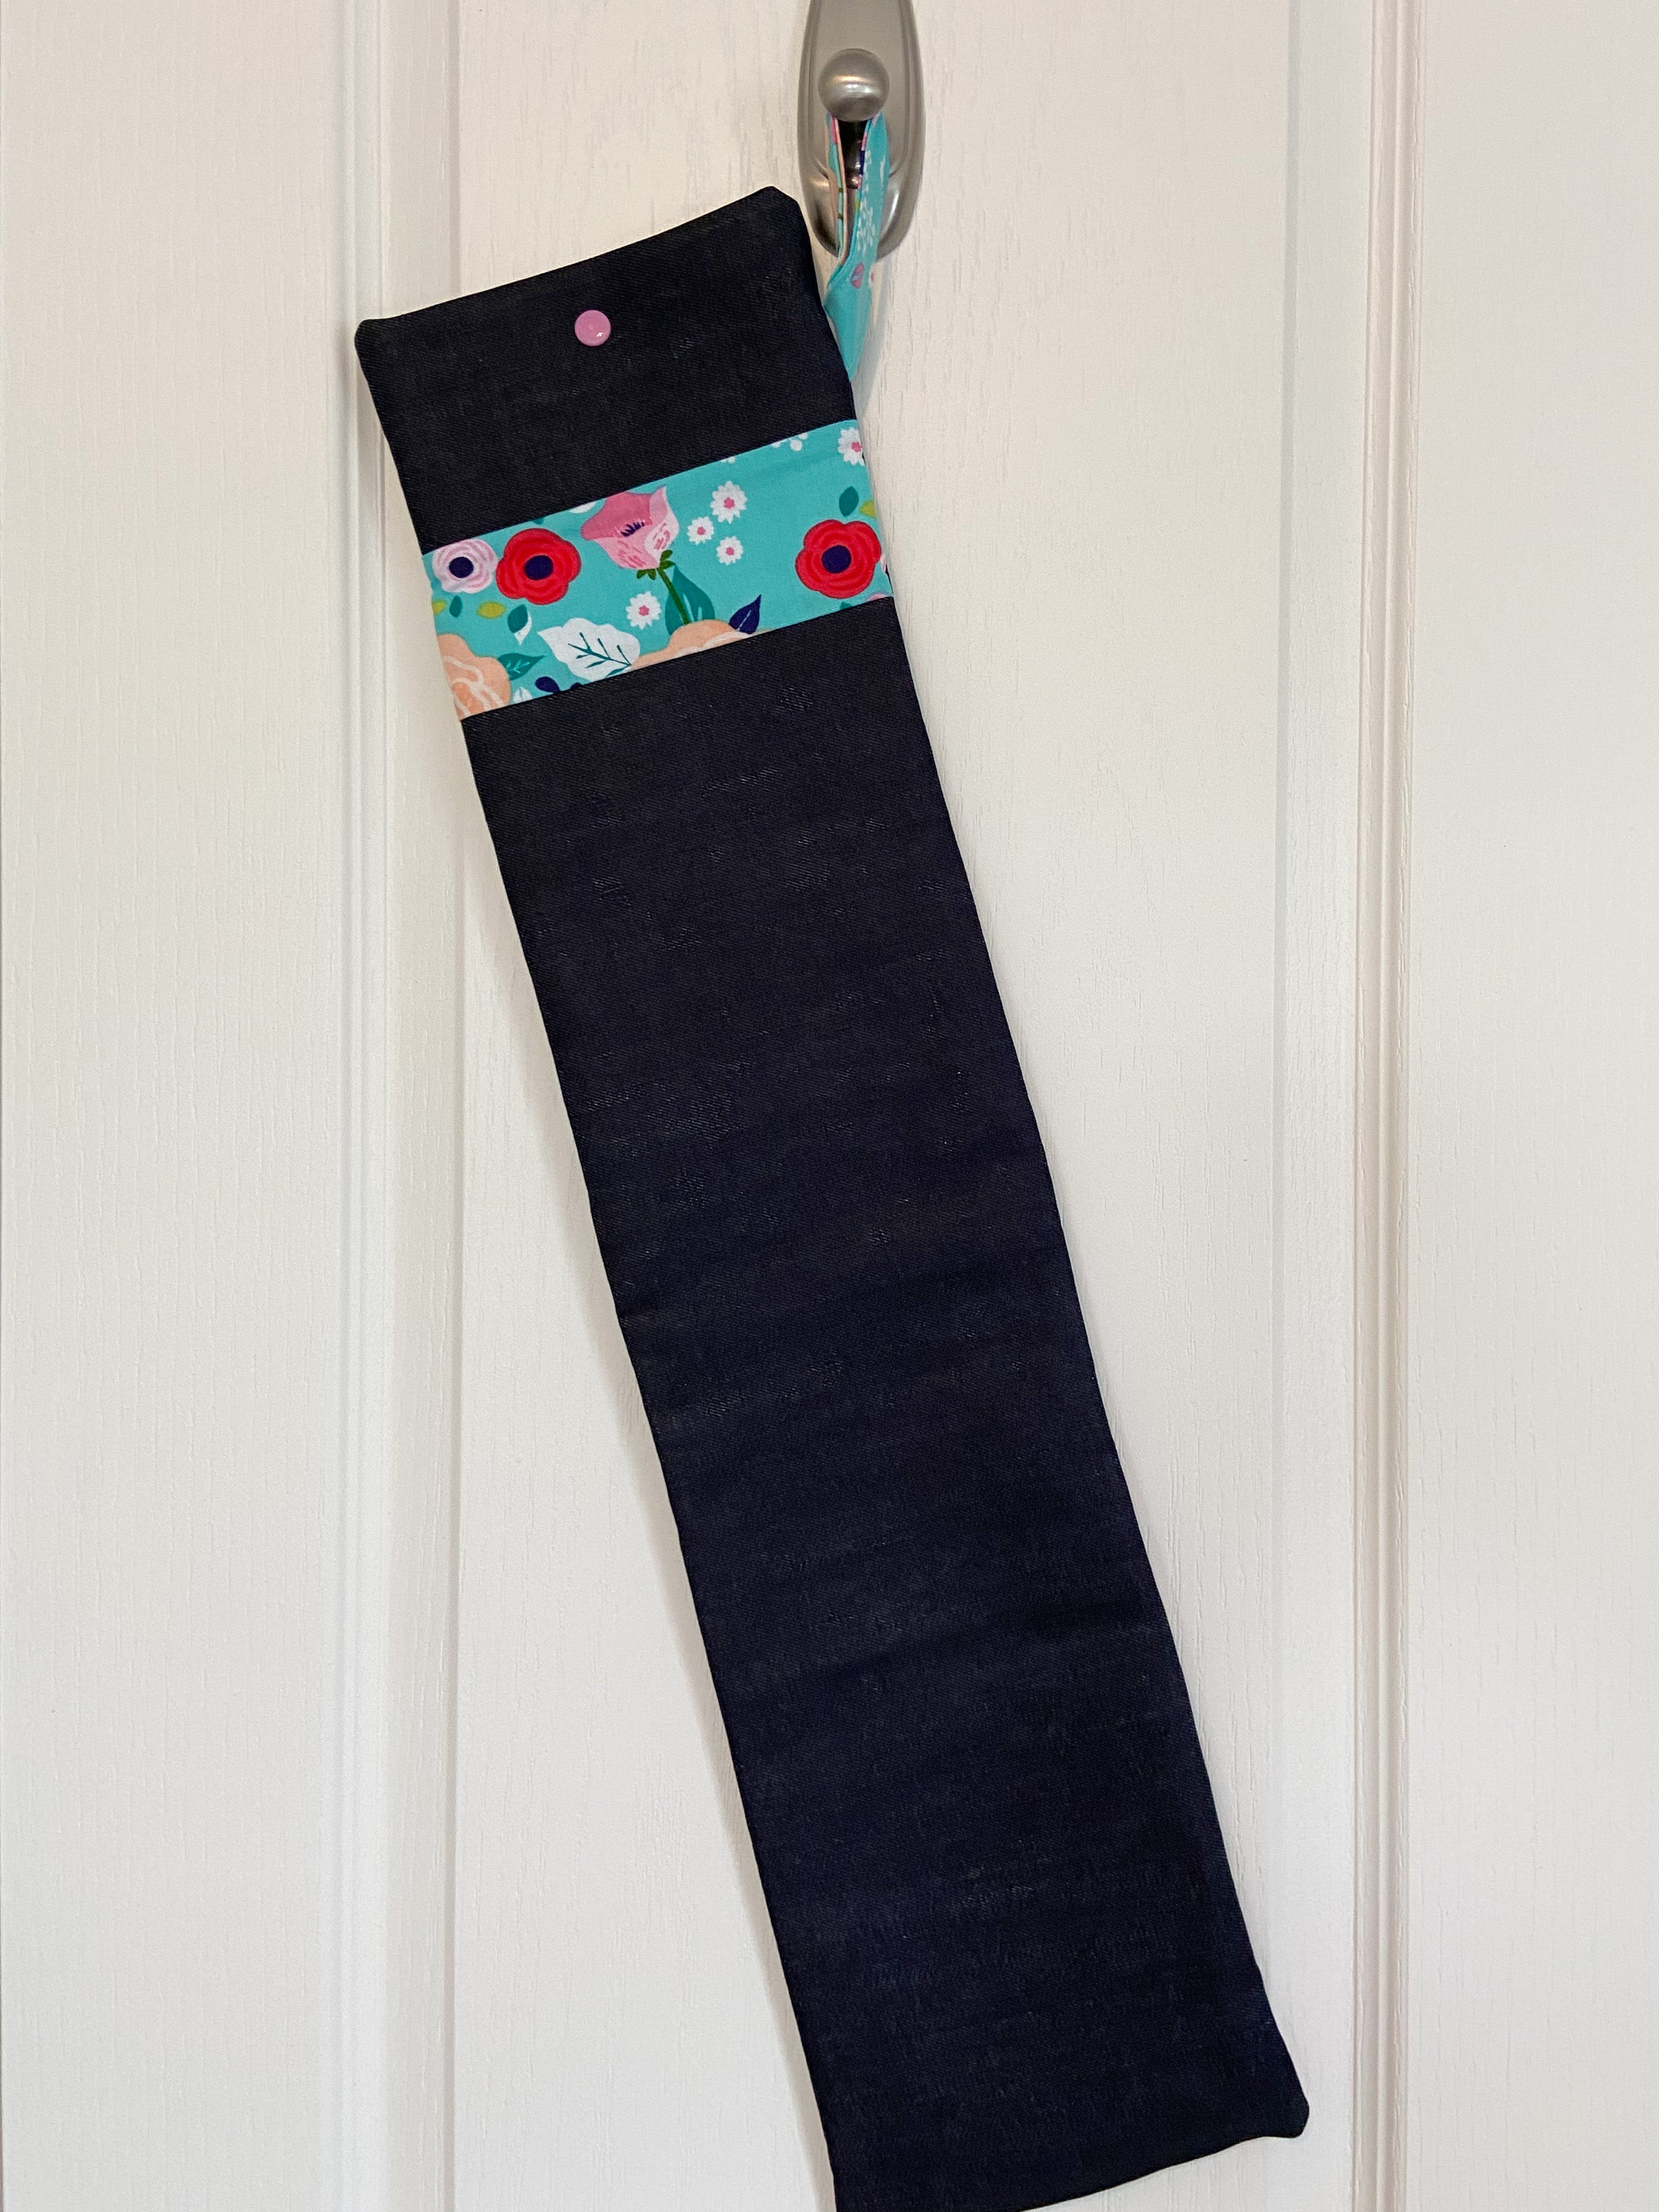 Scroll Rod/Swift Holder - Teal with Flowers